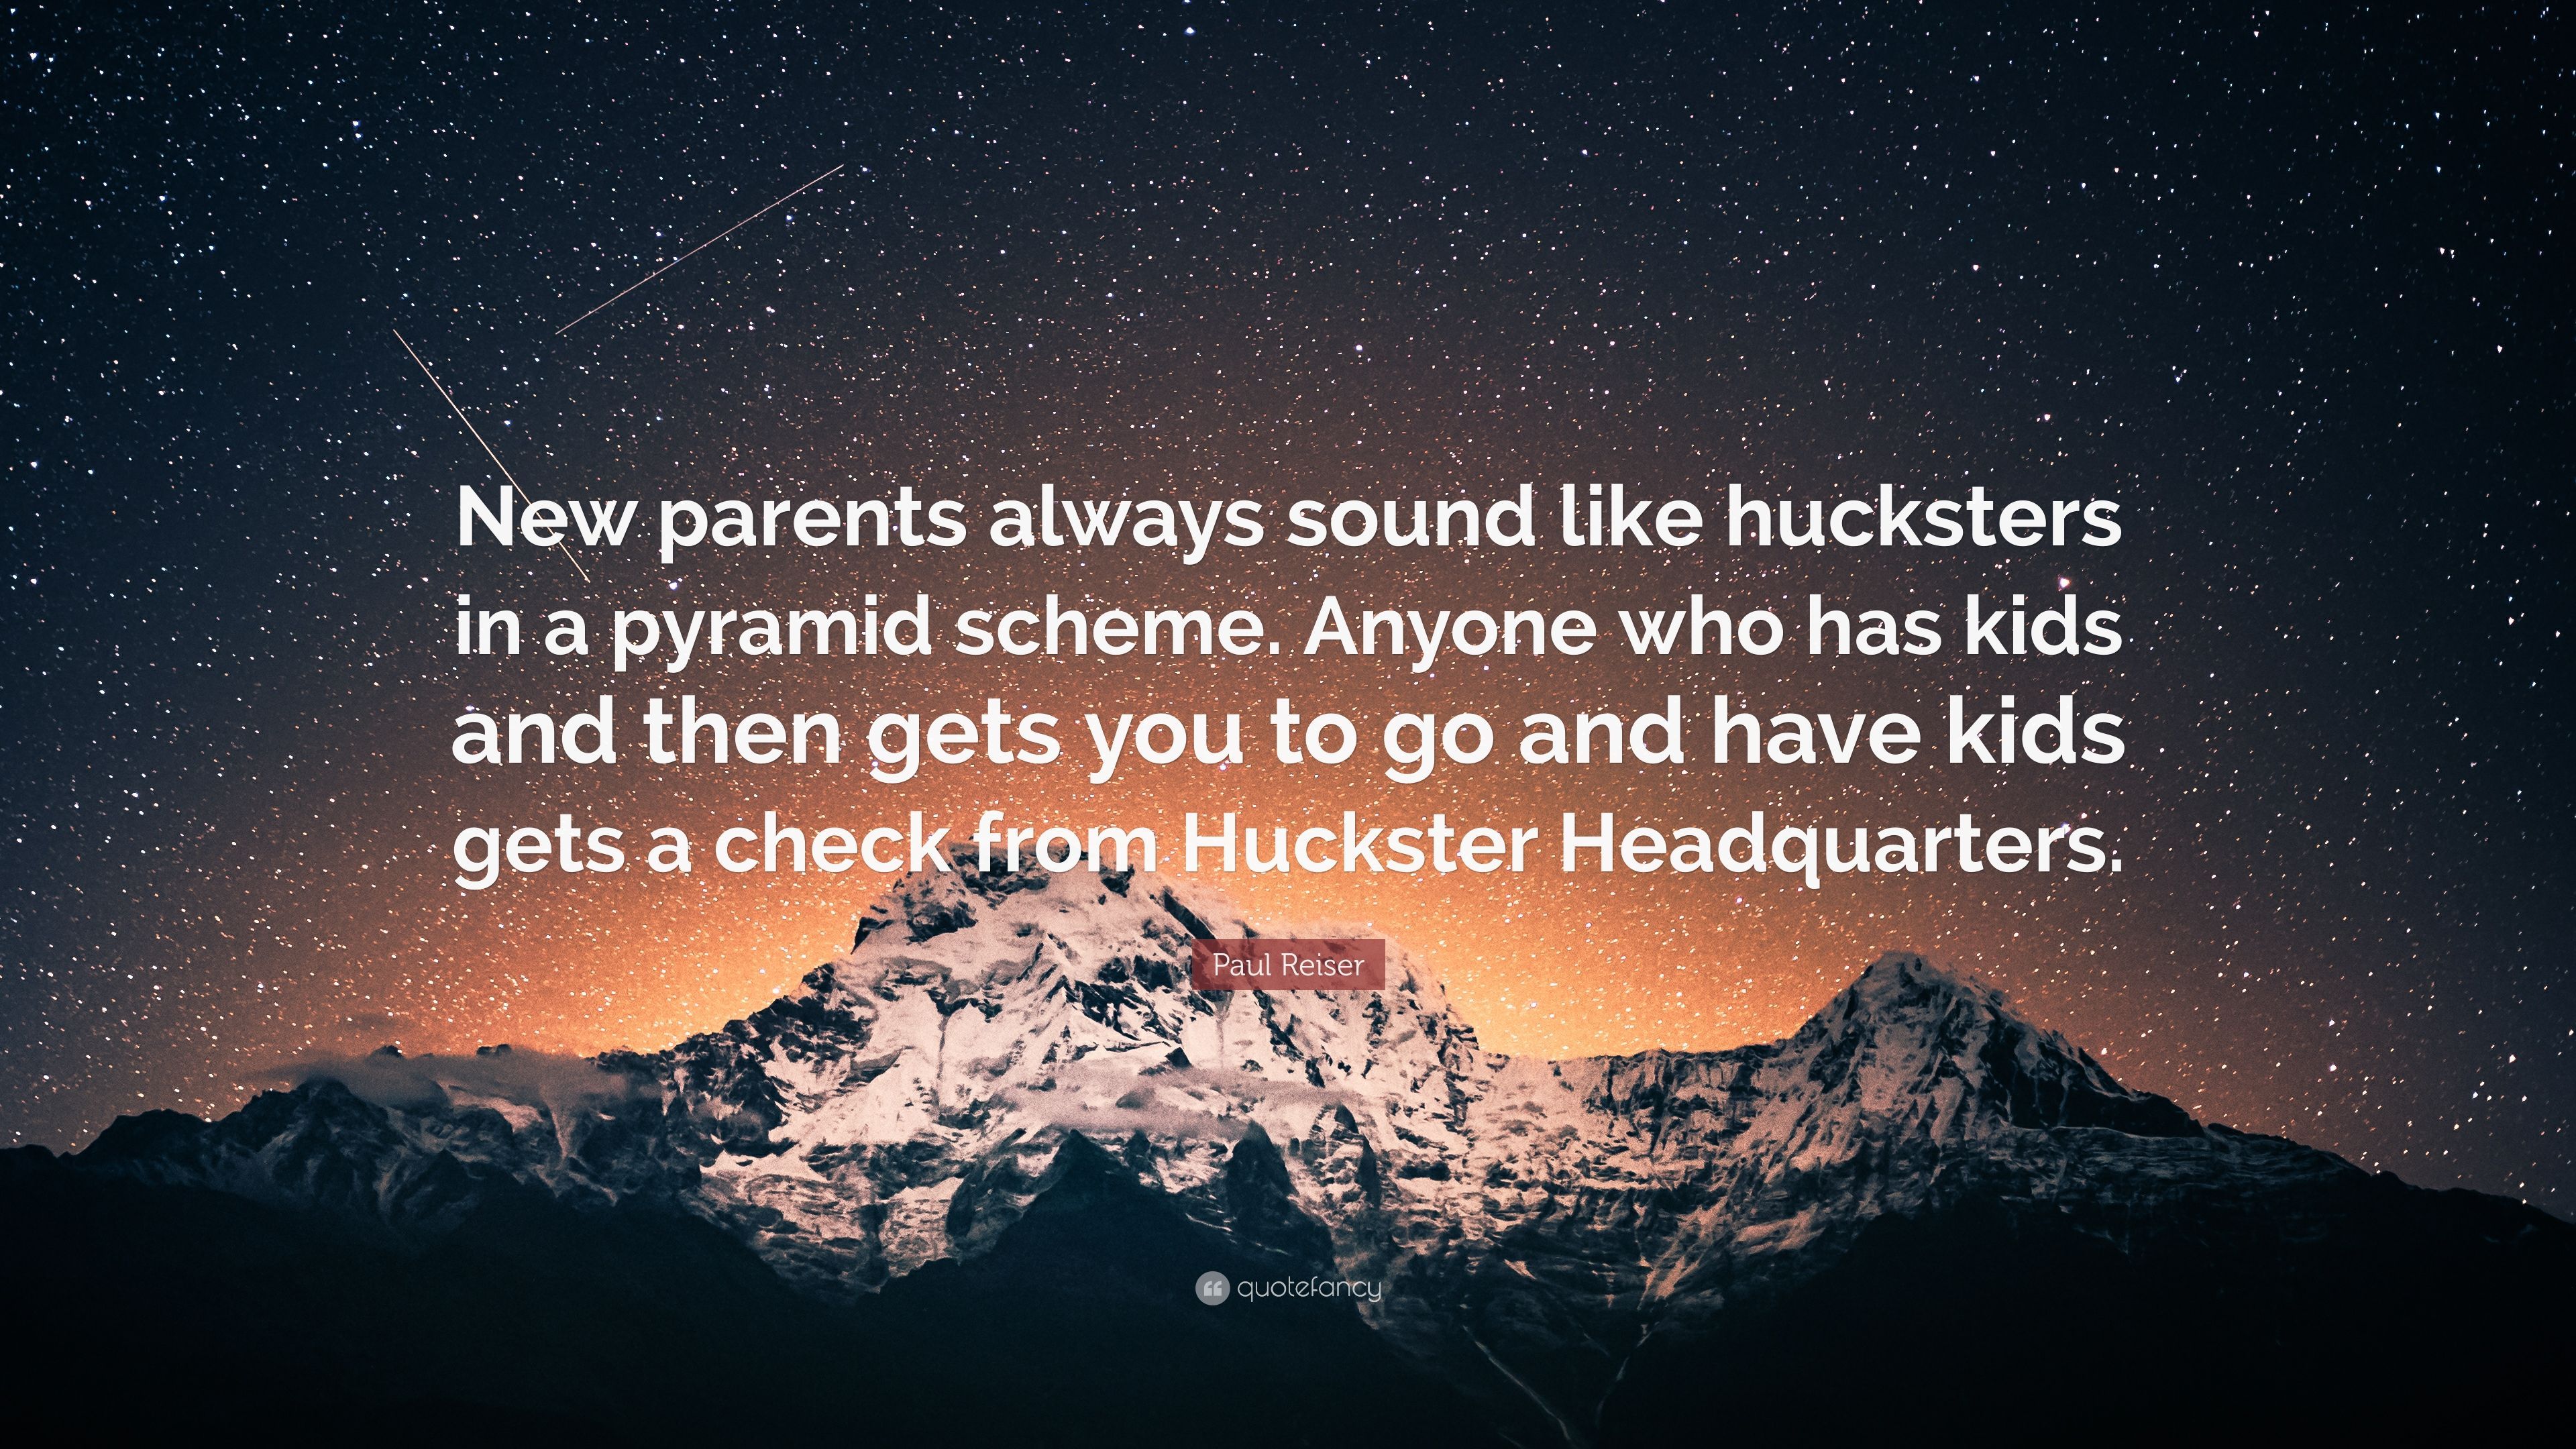 Paul Reiser Quote: “New parents always sound like hucksters in a